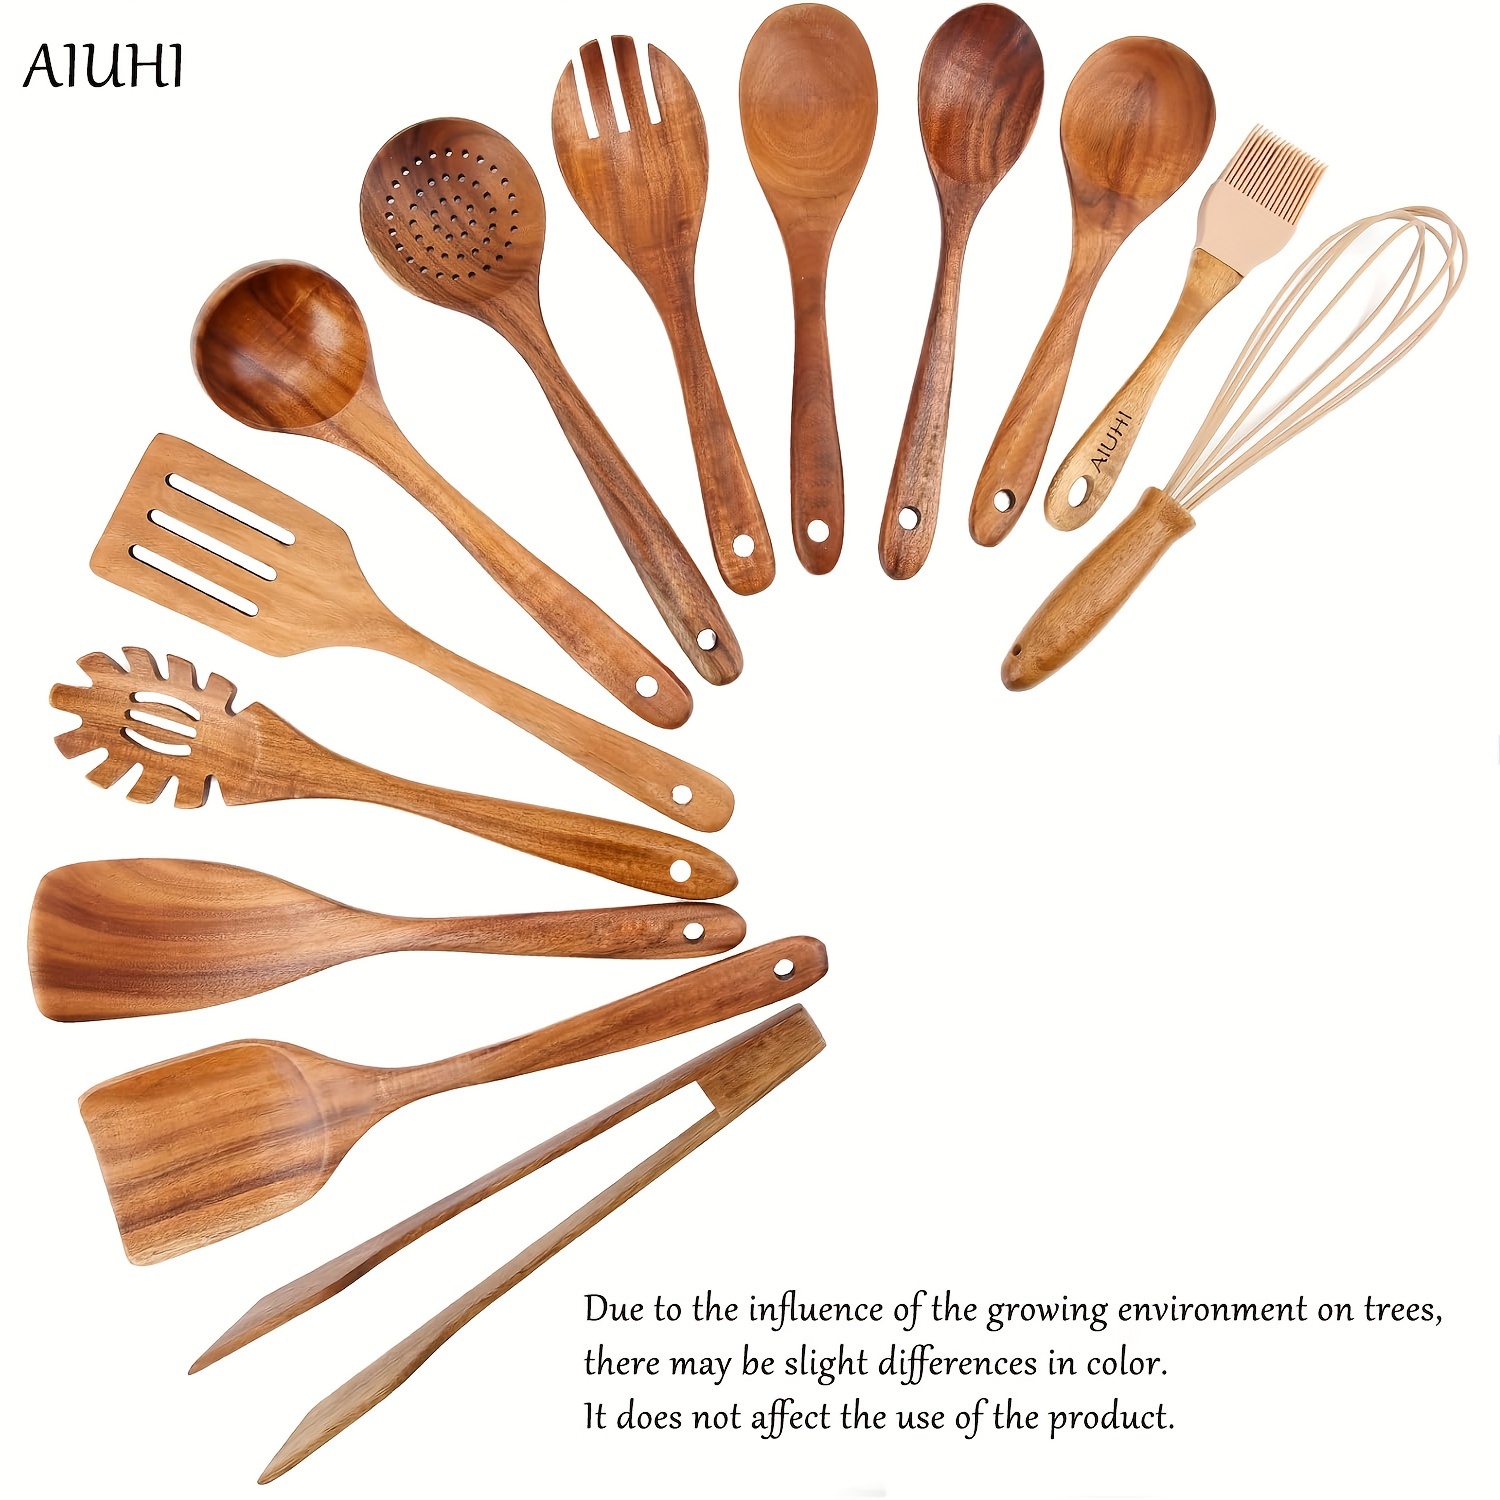 AIUHI 10Pcs Wooden Utensils for Cooking, Wood Utensil Set for Kitchen,  Wooden Spoon for Cooking, Non-Stick Spatula Ladle